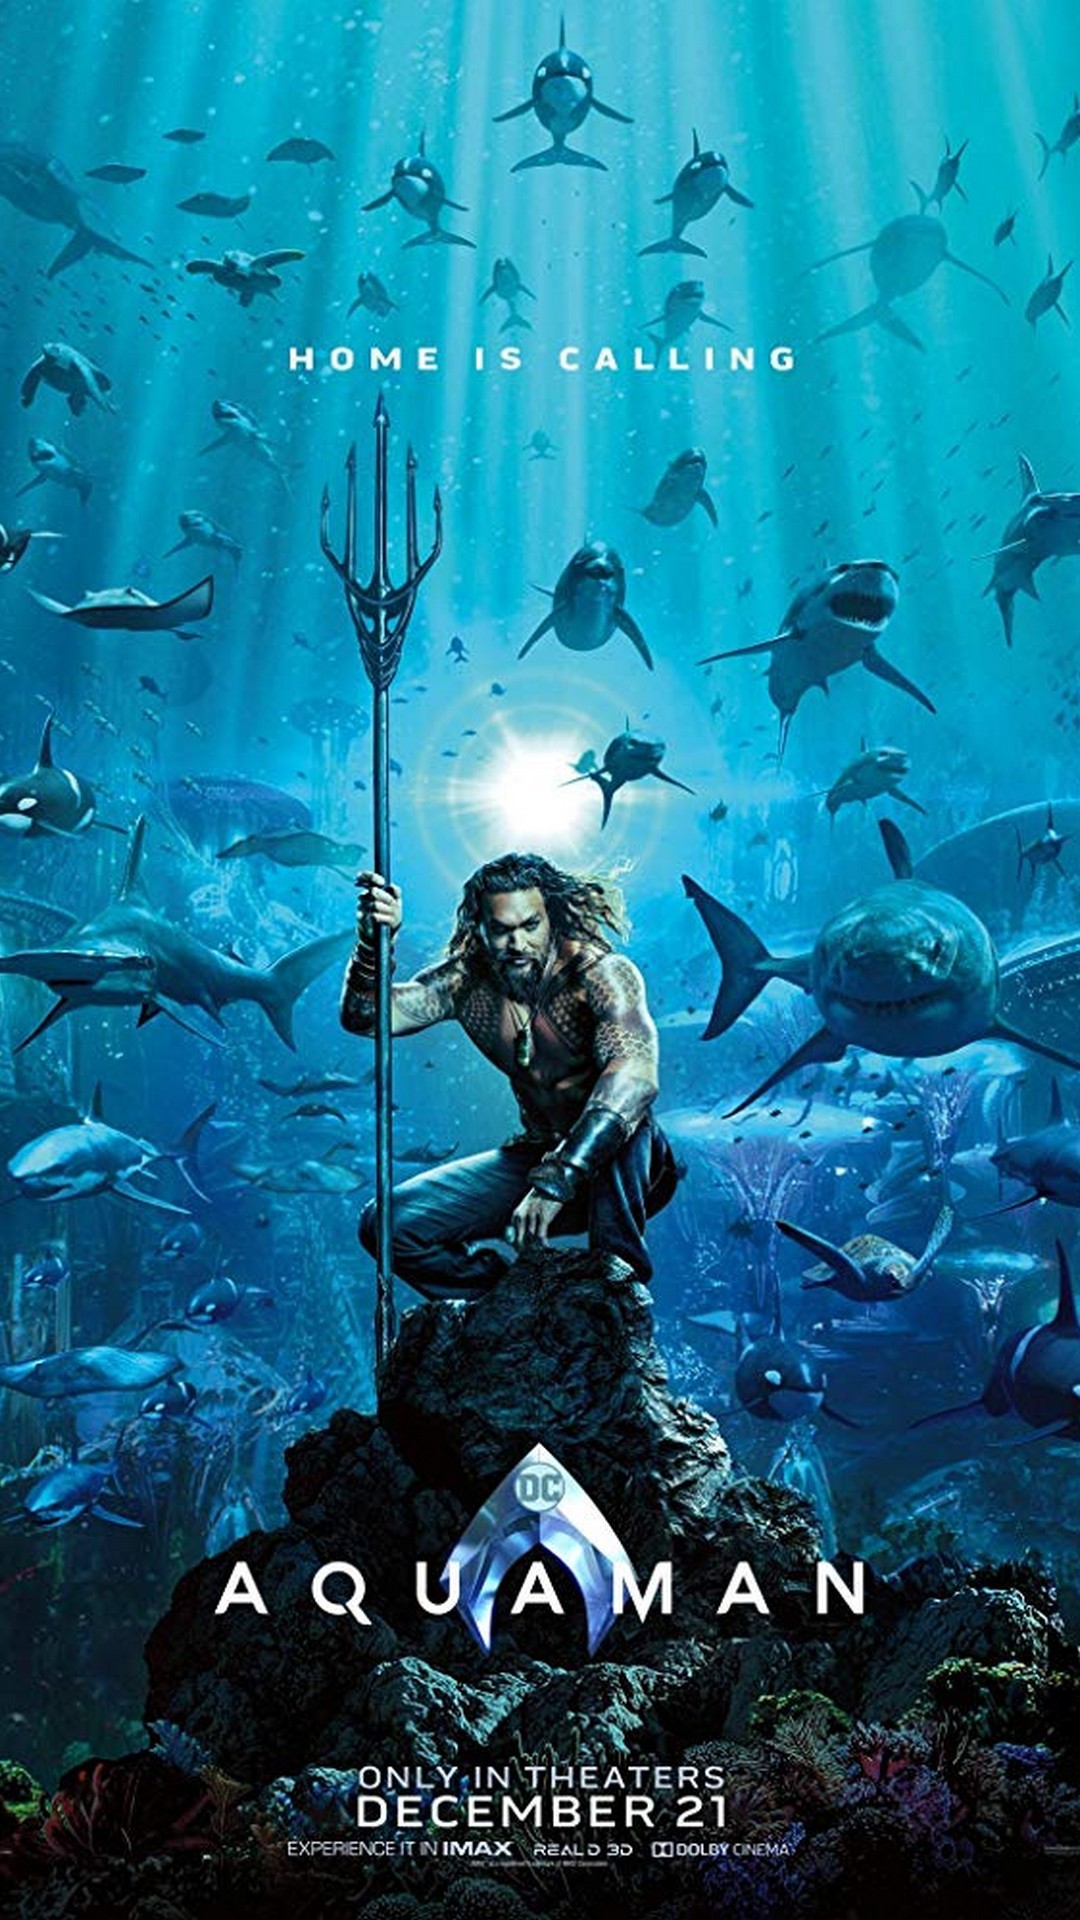 1080x1920 Aquaman 2018 iPhone X Wallpaper with resolution  pixel. You can  make this wallpaper for